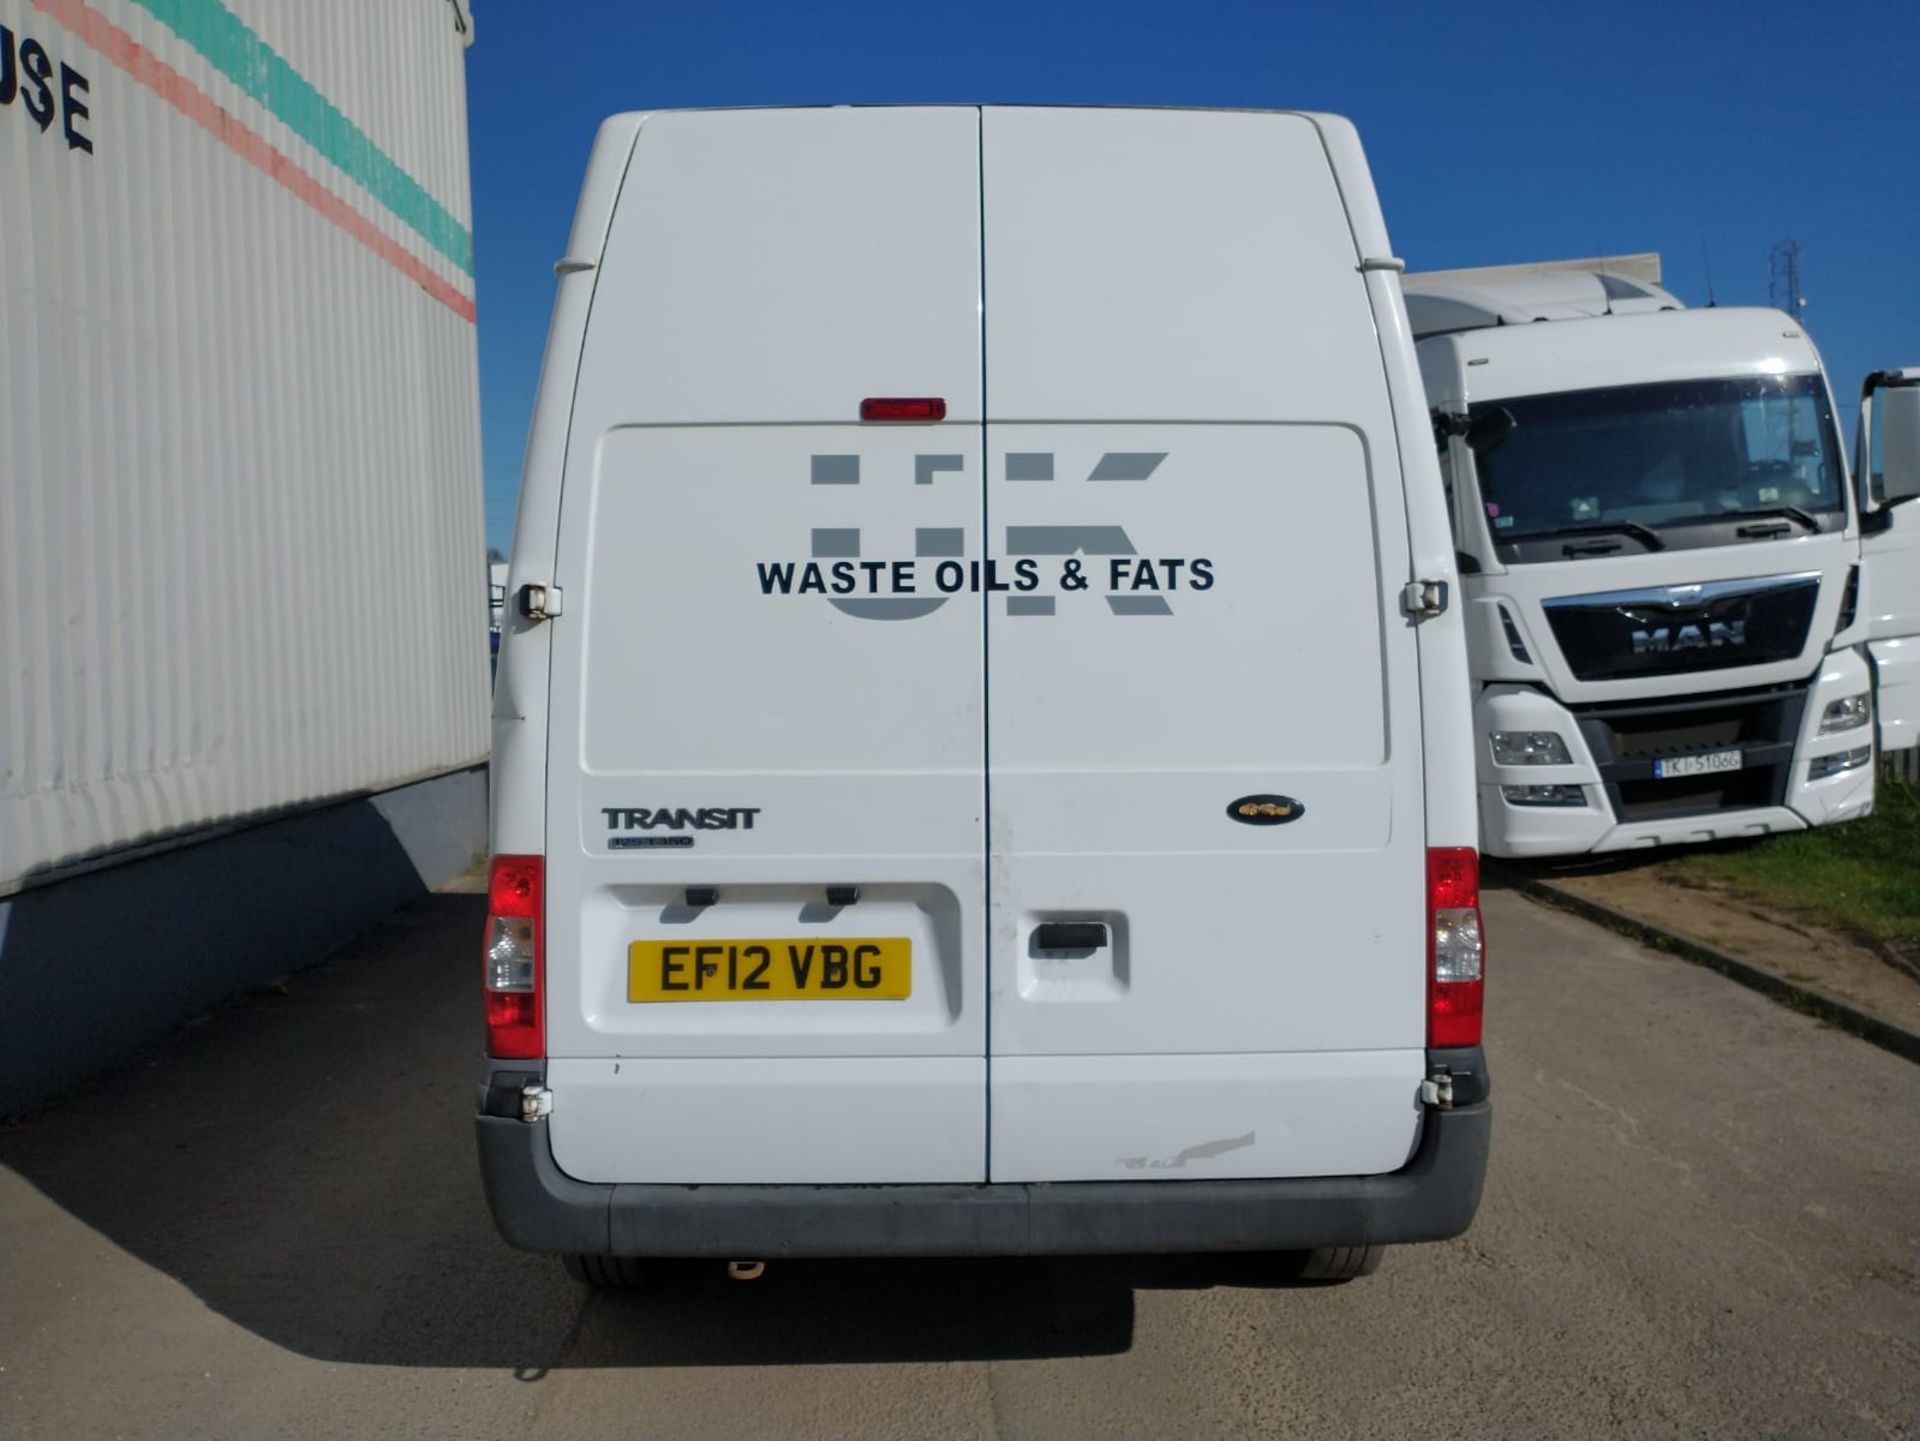 2012 Ford Transit Panel Van 2.2 5dr Medium Roof Panel Van - CL505 - Location: Corby - Image 3 of 13